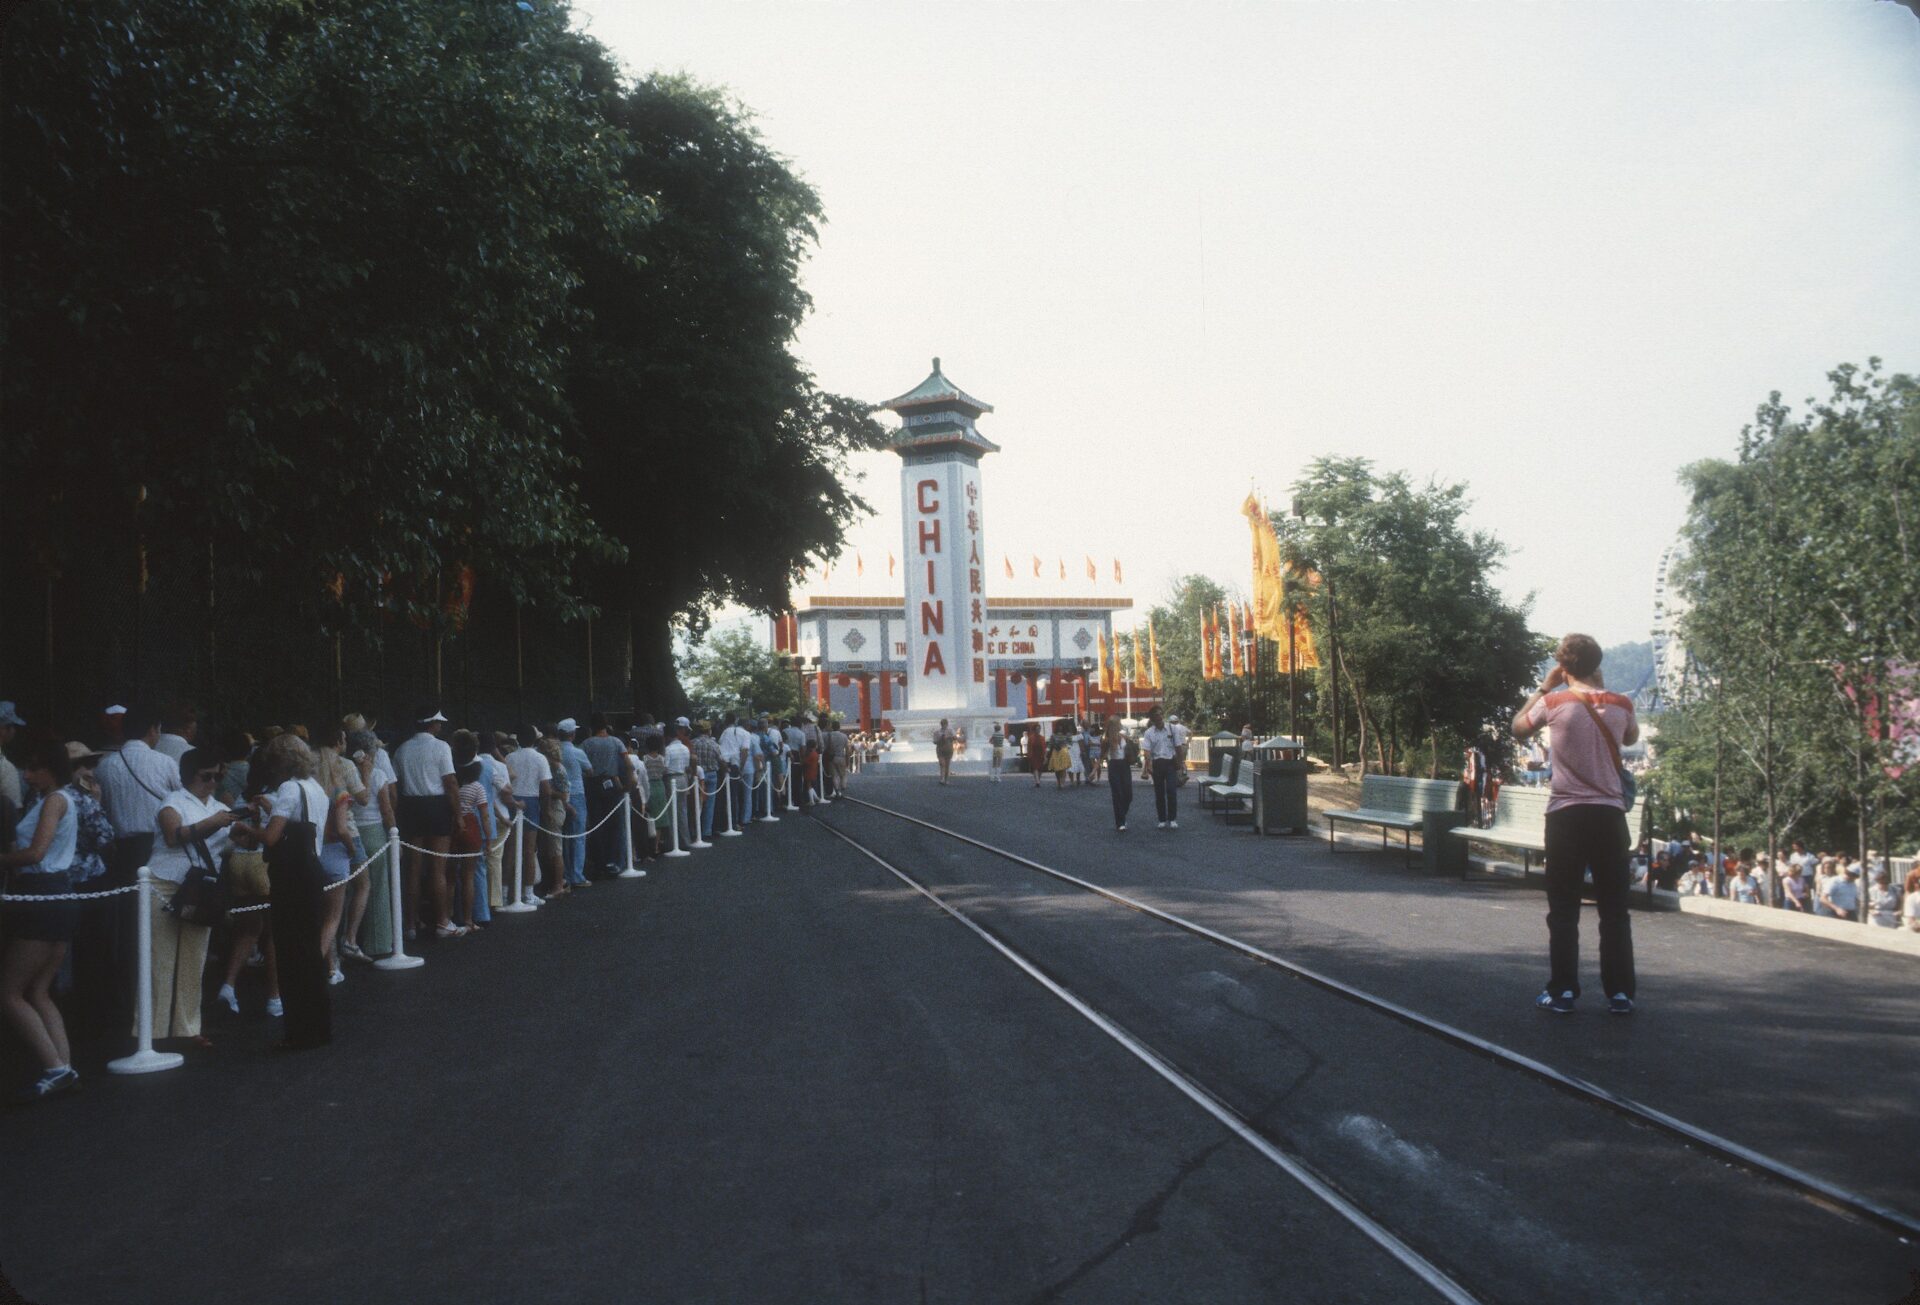 Some fair goers queued for up to 4 hours to get inside the China Pavilion. (Photo by James D. Baeske.)